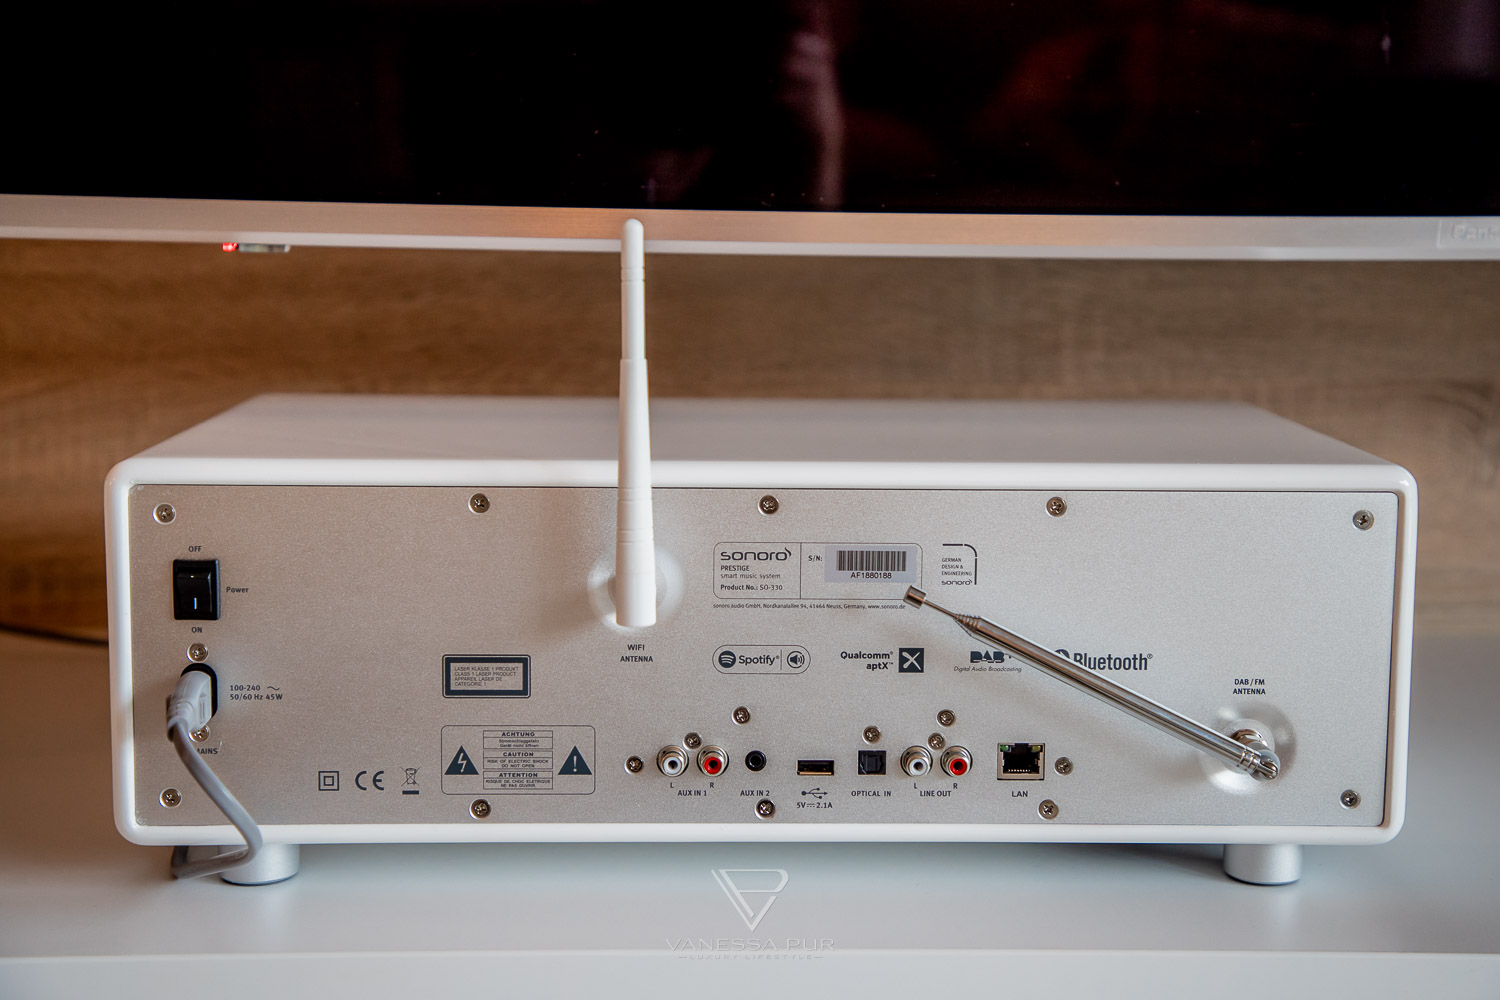 sonoro PRESTIGE - The 2.1 Audio System for Music Lovers - Test and Evaluation - sonoro PRESTIGE series - Experience and impressions of the Smart series from sonoro - Evaluation and product test - Technikblog und Audioblog